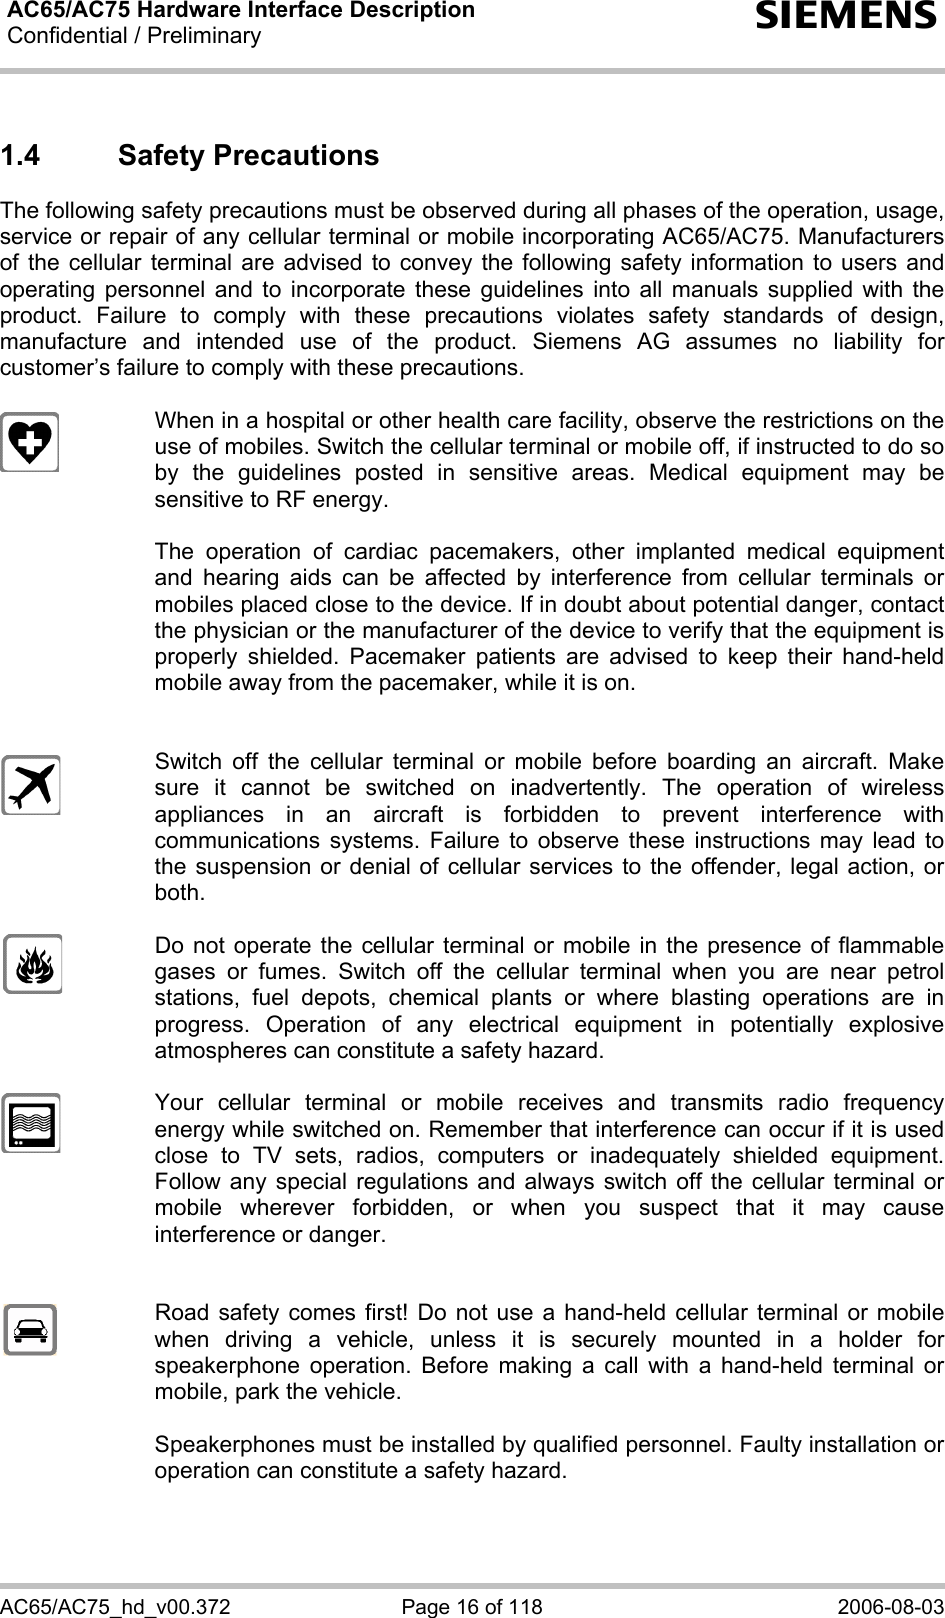 AC65/AC75 Hardware Interface Description Confidential / Preliminary  s AC65/AC75_hd_v00.372  Page 16 of 118  2006-08-03 1.4 Safety Precautions The following safety precautions must be observed during all phases of the operation, usage, service or repair of any cellular terminal or mobile incorporating AC65/AC75. Manufacturers of the cellular terminal are advised to convey the following safety information to users and operating personnel and to incorporate these guidelines into all manuals supplied with the product. Failure to comply with these precautions violates safety standards of design, manufacture and intended use of the product. Siemens AG assumes no liability for customer’s failure to comply with these precautions.    When in a hospital or other health care facility, observe the restrictions on the use of mobiles. Switch the cellular terminal or mobile off, if instructed to do so by the guidelines posted in sensitive areas. Medical equipment may be sensitive to RF energy.   The operation of cardiac pacemakers, other implanted medical equipment and hearing aids can be affected by interference from cellular terminals or mobiles placed close to the device. If in doubt about potential danger, contact the physician or the manufacturer of the device to verify that the equipment is properly shielded. Pacemaker patients are advised to keep their hand-held mobile away from the pacemaker, while it is on.      Switch off the cellular terminal or mobile before boarding an aircraft. Make sure it cannot be switched on inadvertently. The operation of wireless appliances in an aircraft is forbidden to prevent interference with communications systems. Failure to observe these instructions may lead to the suspension or denial of cellular services to the offender, legal action, or both.    Do not operate the cellular terminal or mobile in the presence of flammable gases or fumes. Switch off the cellular terminal when you are near petrol stations, fuel depots, chemical plants or where blasting operations are in progress. Operation of any electrical equipment in potentially explosive atmospheres can constitute a safety hazard.    Your cellular terminal or mobile receives and transmits radio frequency energy while switched on. Remember that interference can occur if it is used close to TV sets, radios, computers or inadequately shielded equipment. Follow any special regulations and always switch off the cellular terminal or mobile wherever forbidden, or when you suspect that it may cause interference or danger.     Road safety comes first! Do not use a hand-held cellular terminal or mobile when driving a vehicle, unless it is securely mounted in a holder for speakerphone operation. Before making a call with a hand-held terminal or mobile, park the vehicle.   Speakerphones must be installed by qualified personnel. Faulty installation or operation can constitute a safety hazard.  